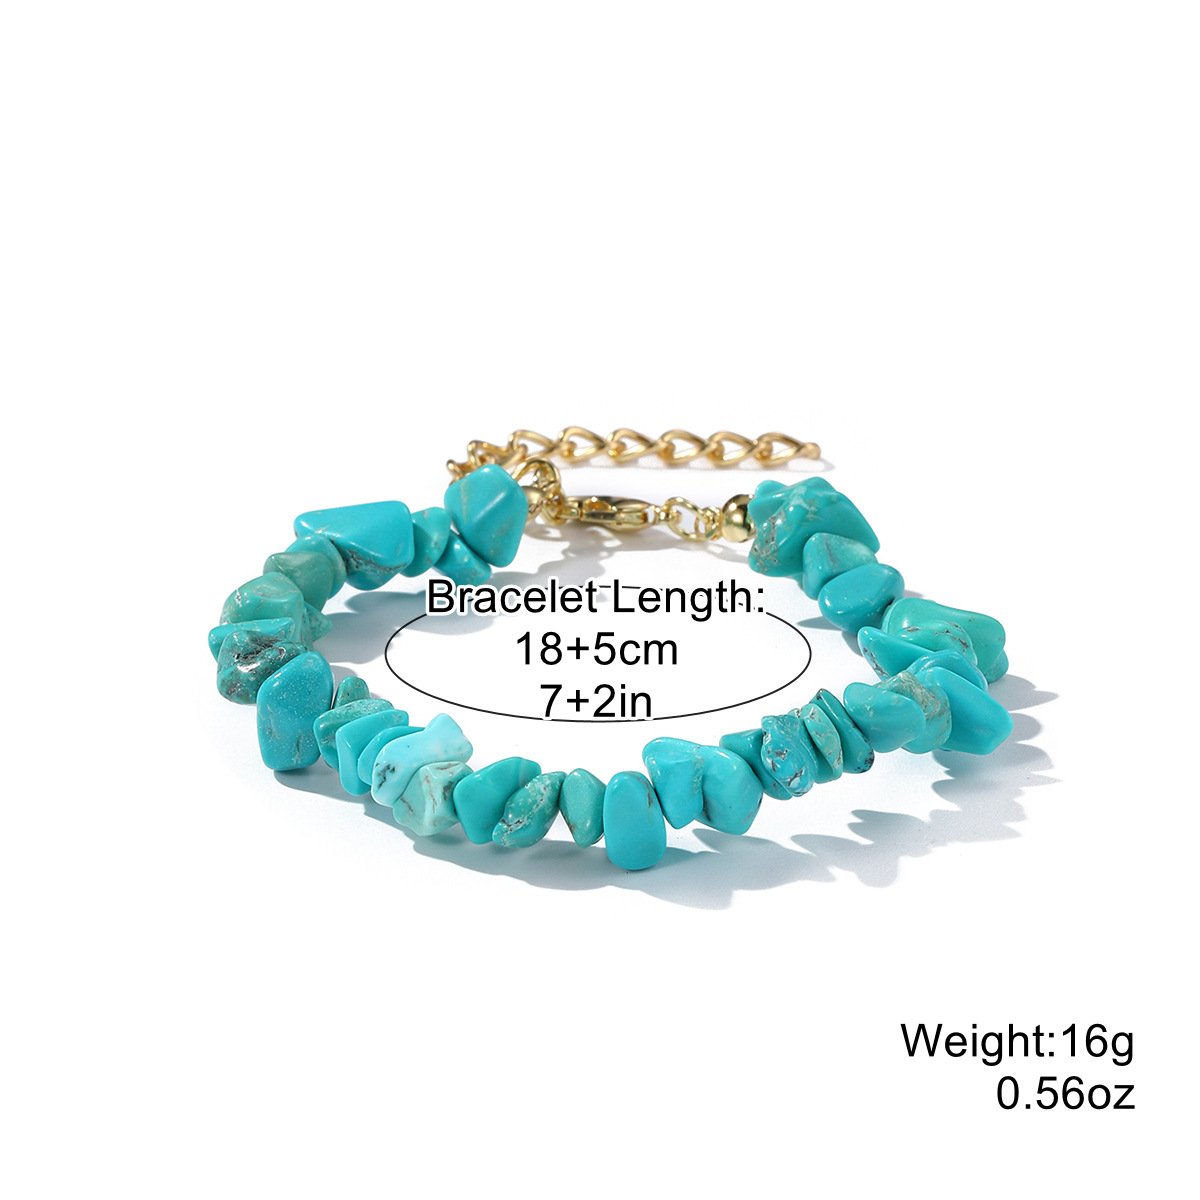 1:Blue turquoise chain